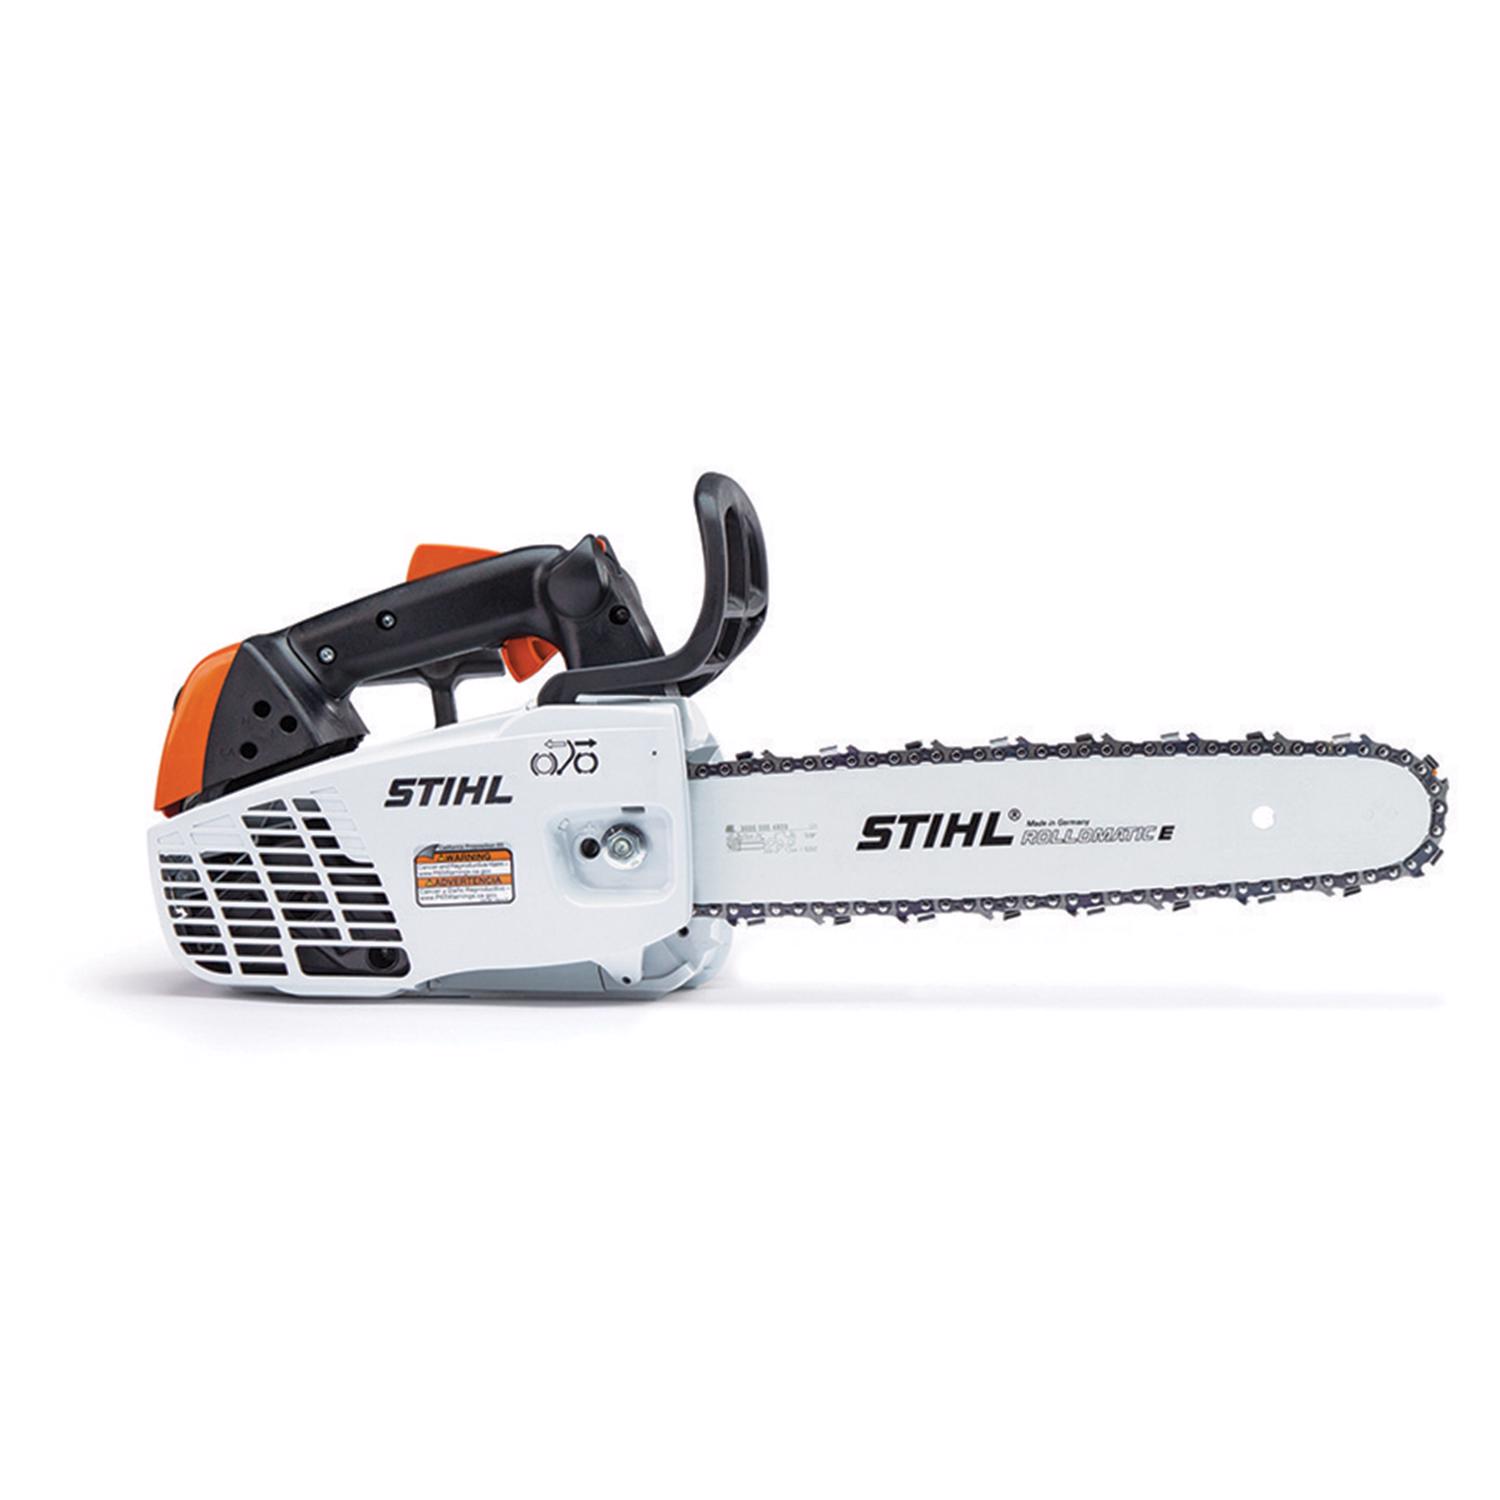 STIHL MS 180 Gas Chainsaw 16 in. 31.8 cc, Tool Only - Ace Hardware